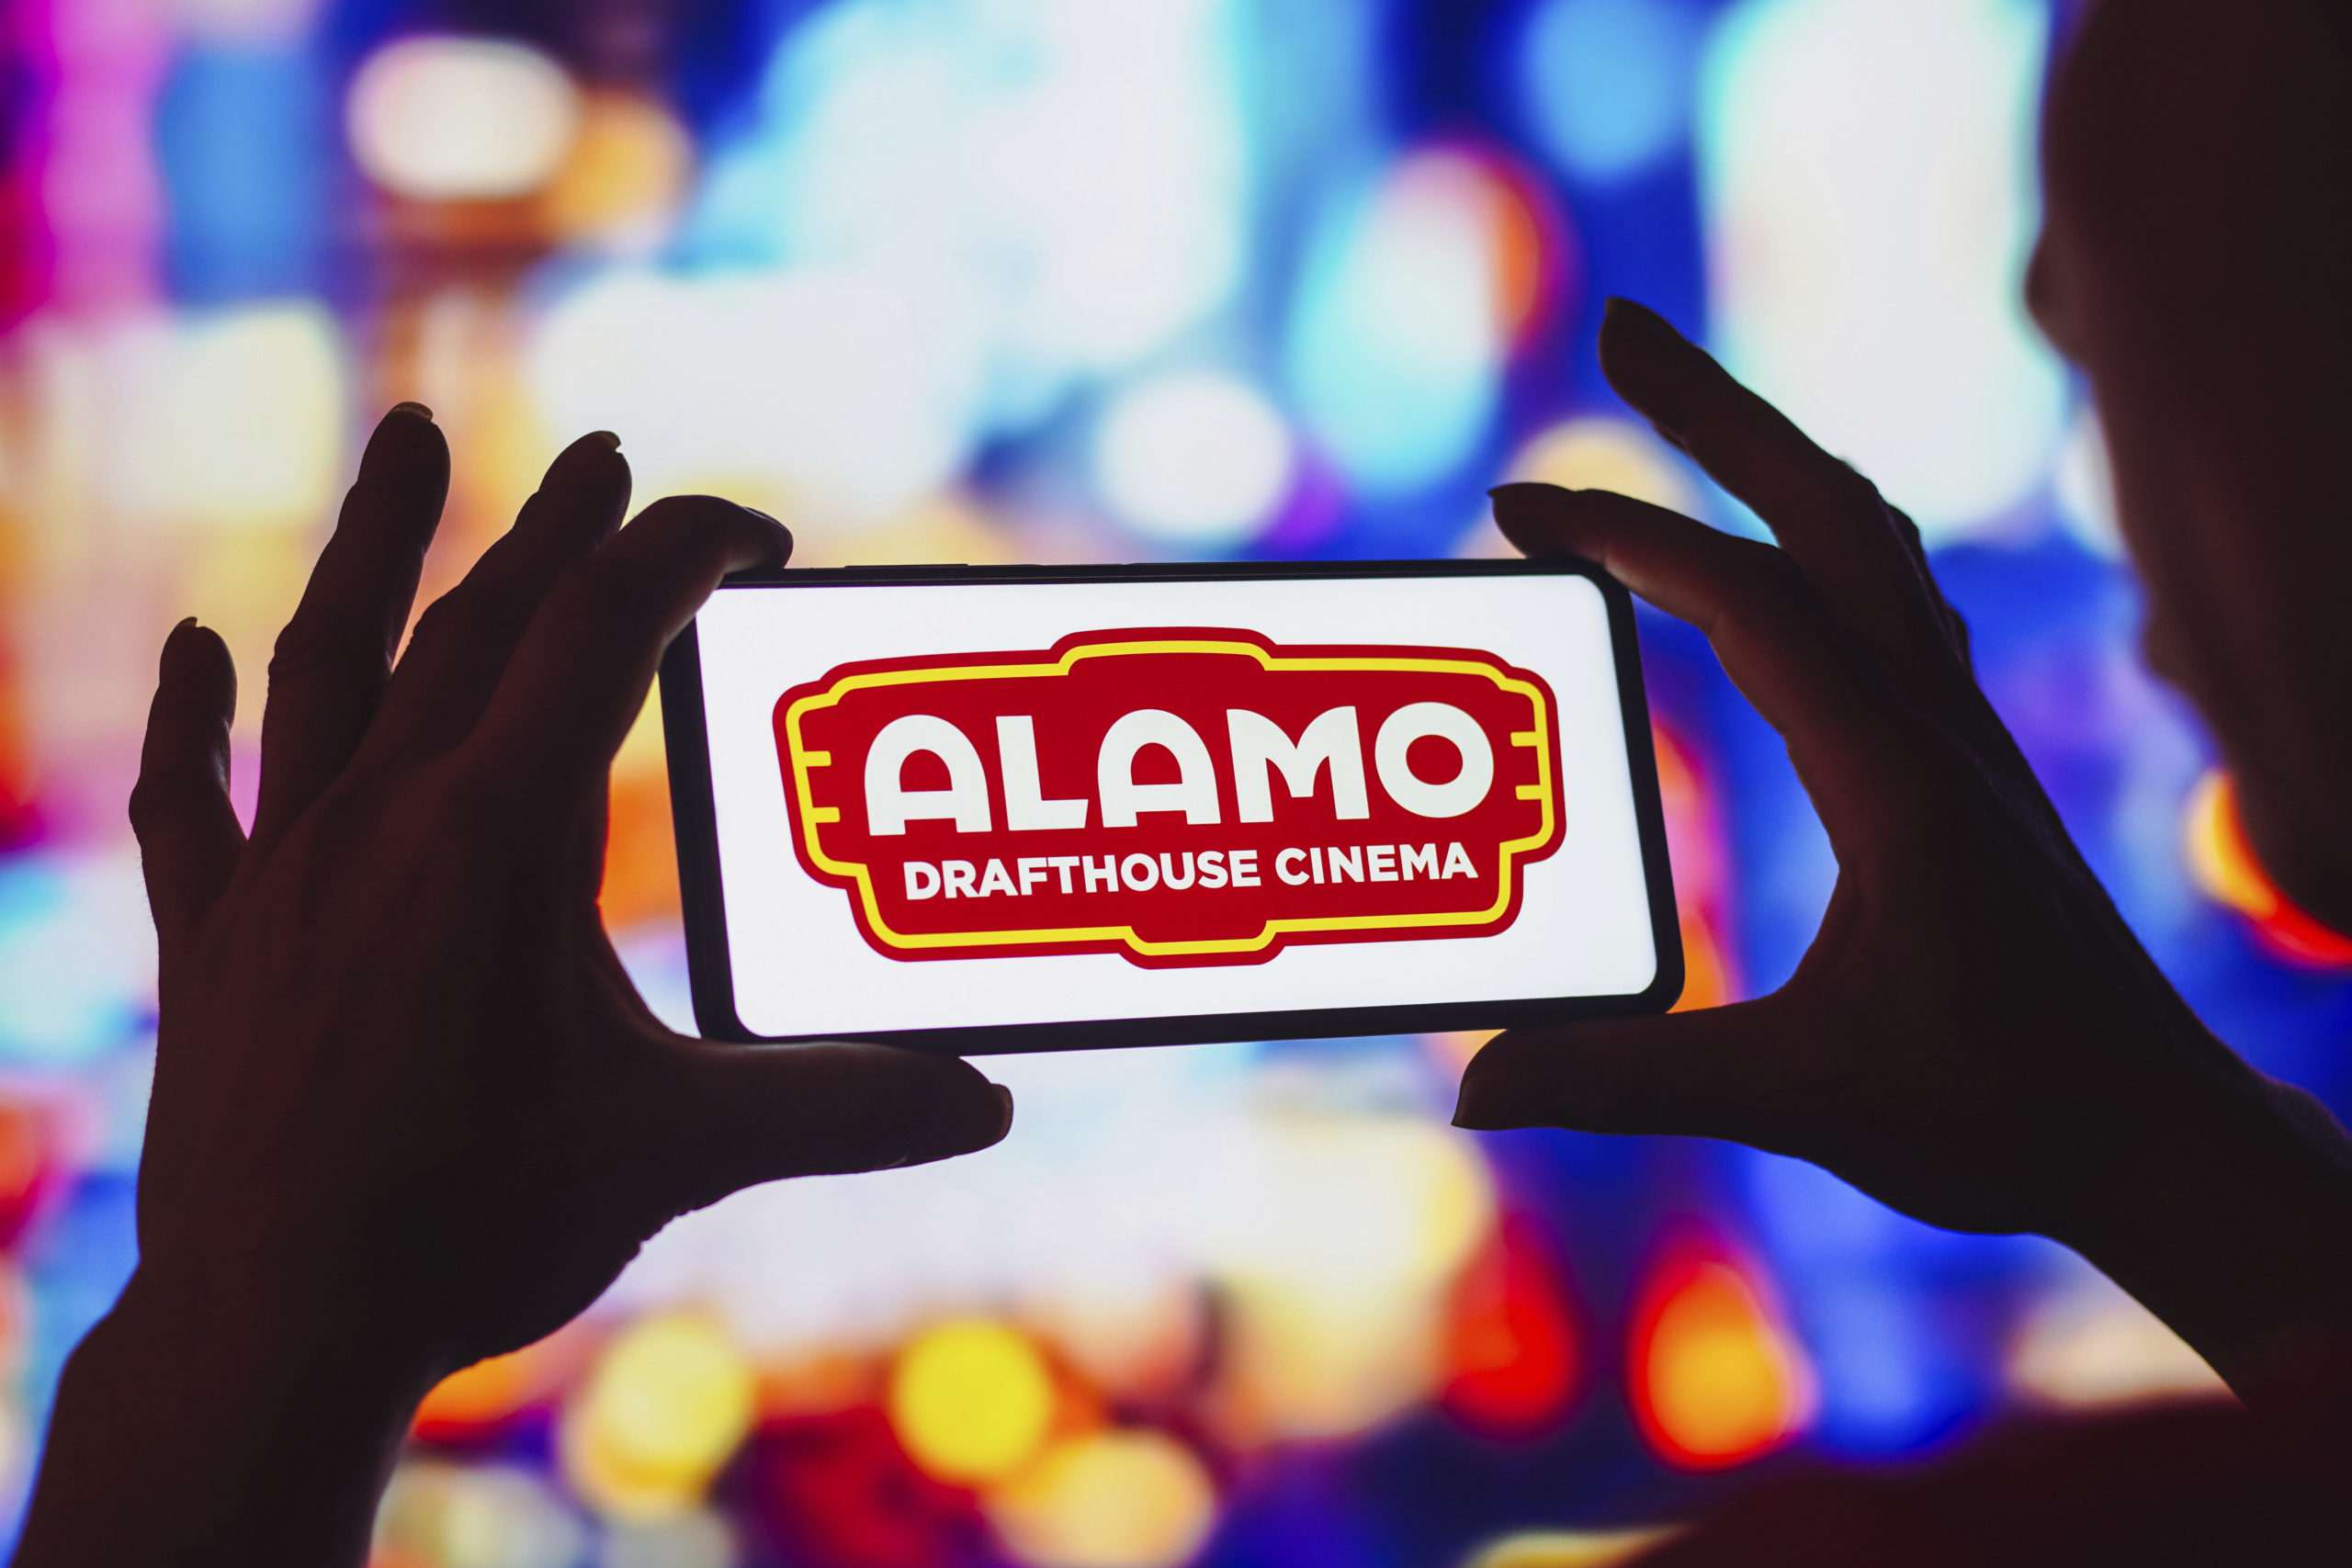 A silhoutte of a face and hands holding a smartphone, which has the Almao Drafthouse Cinema logo on it.